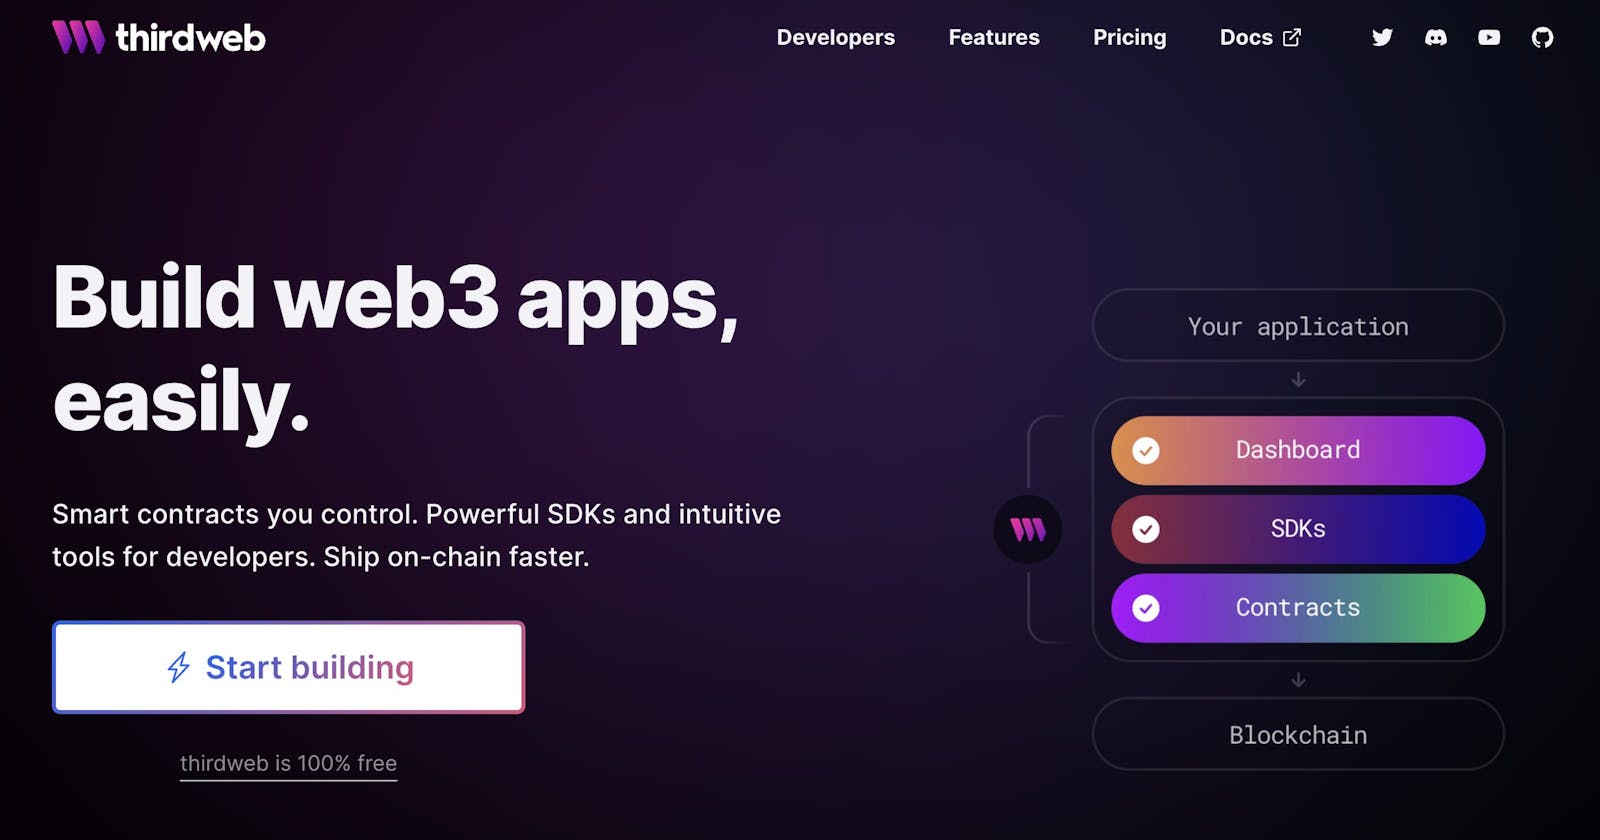 Build web3 apps, in a few minutes for FREE.